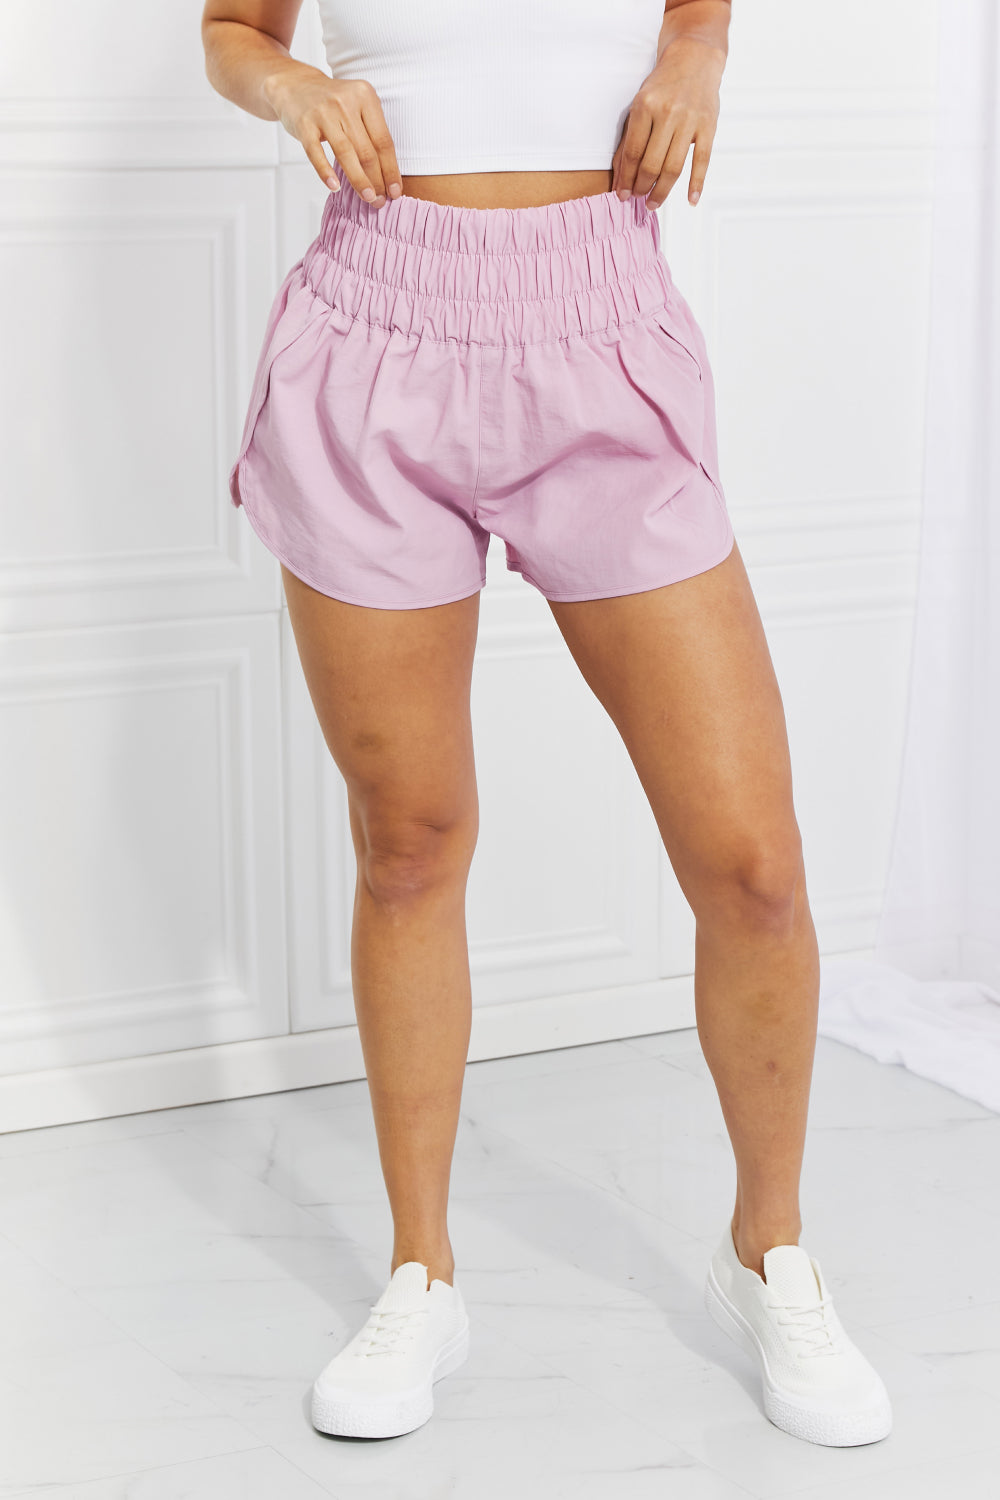 Zenana Cross Country Smocked Waist Running Shorts in Pink - Cheeky Chic Boutique